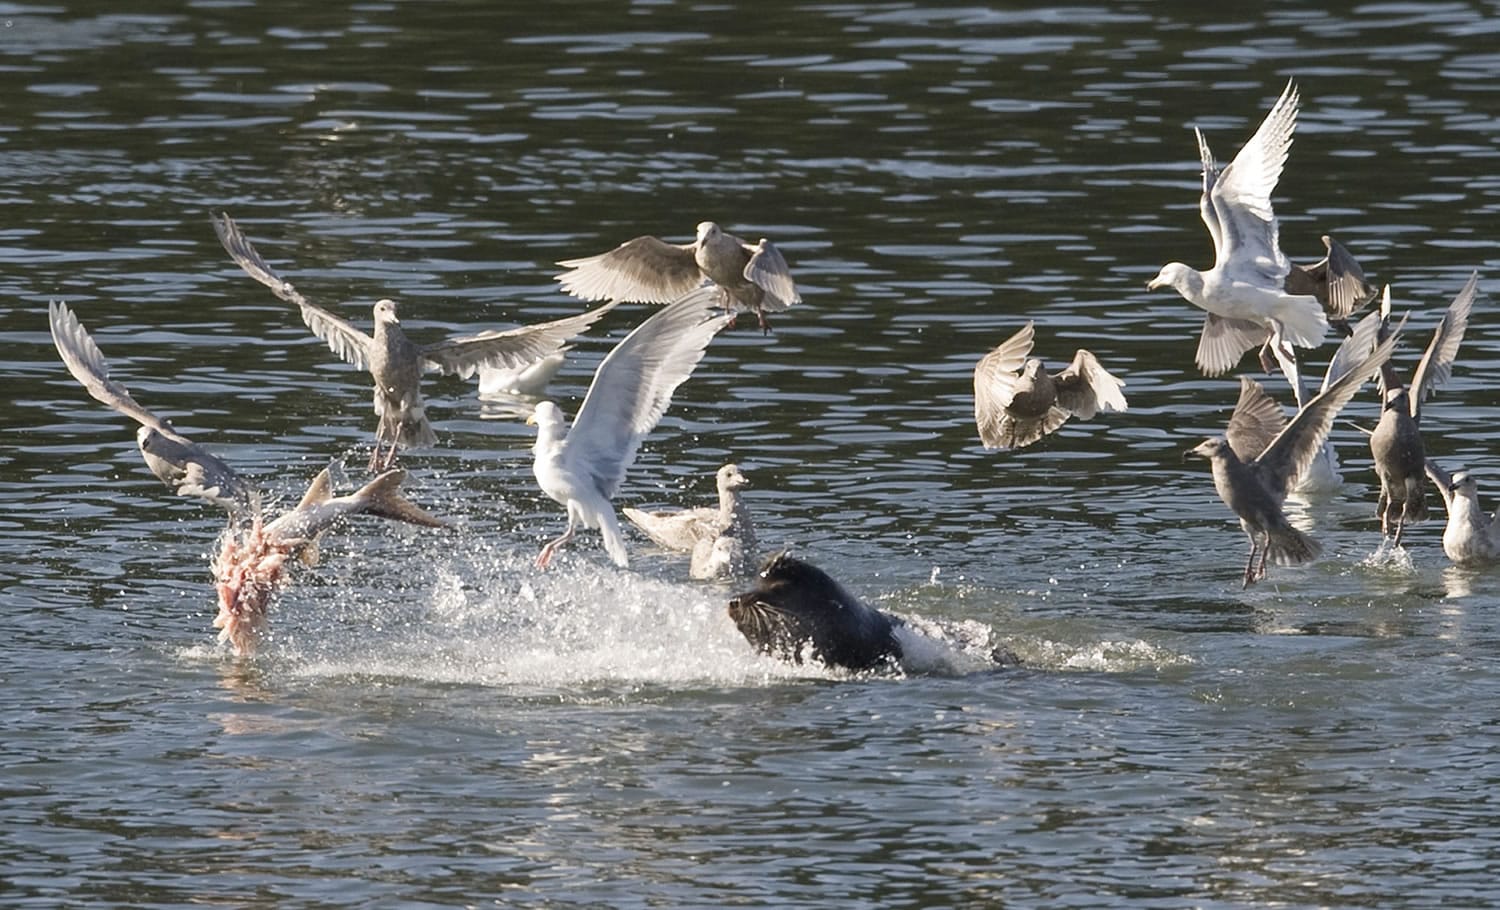 A sea lion feasts on a sturgeon in the Columbia River downstream of Bonneville Dam.